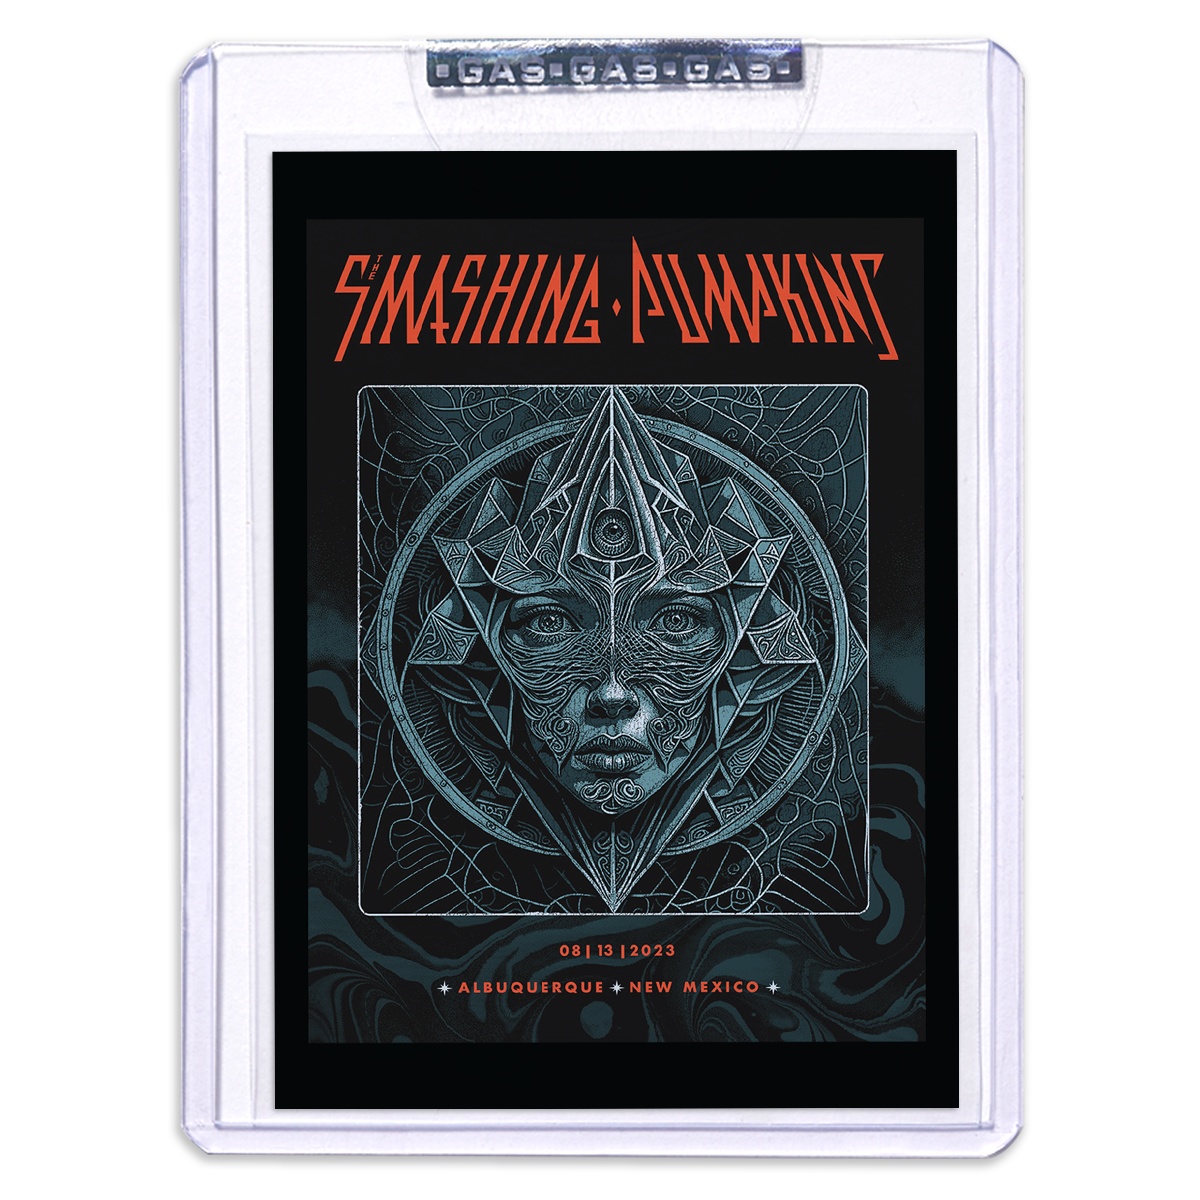 GAS The Smashing Pumpkins August 13, 2023, Albuquerque, NM Setlist Trading Card Illustrated by Dido Peshev